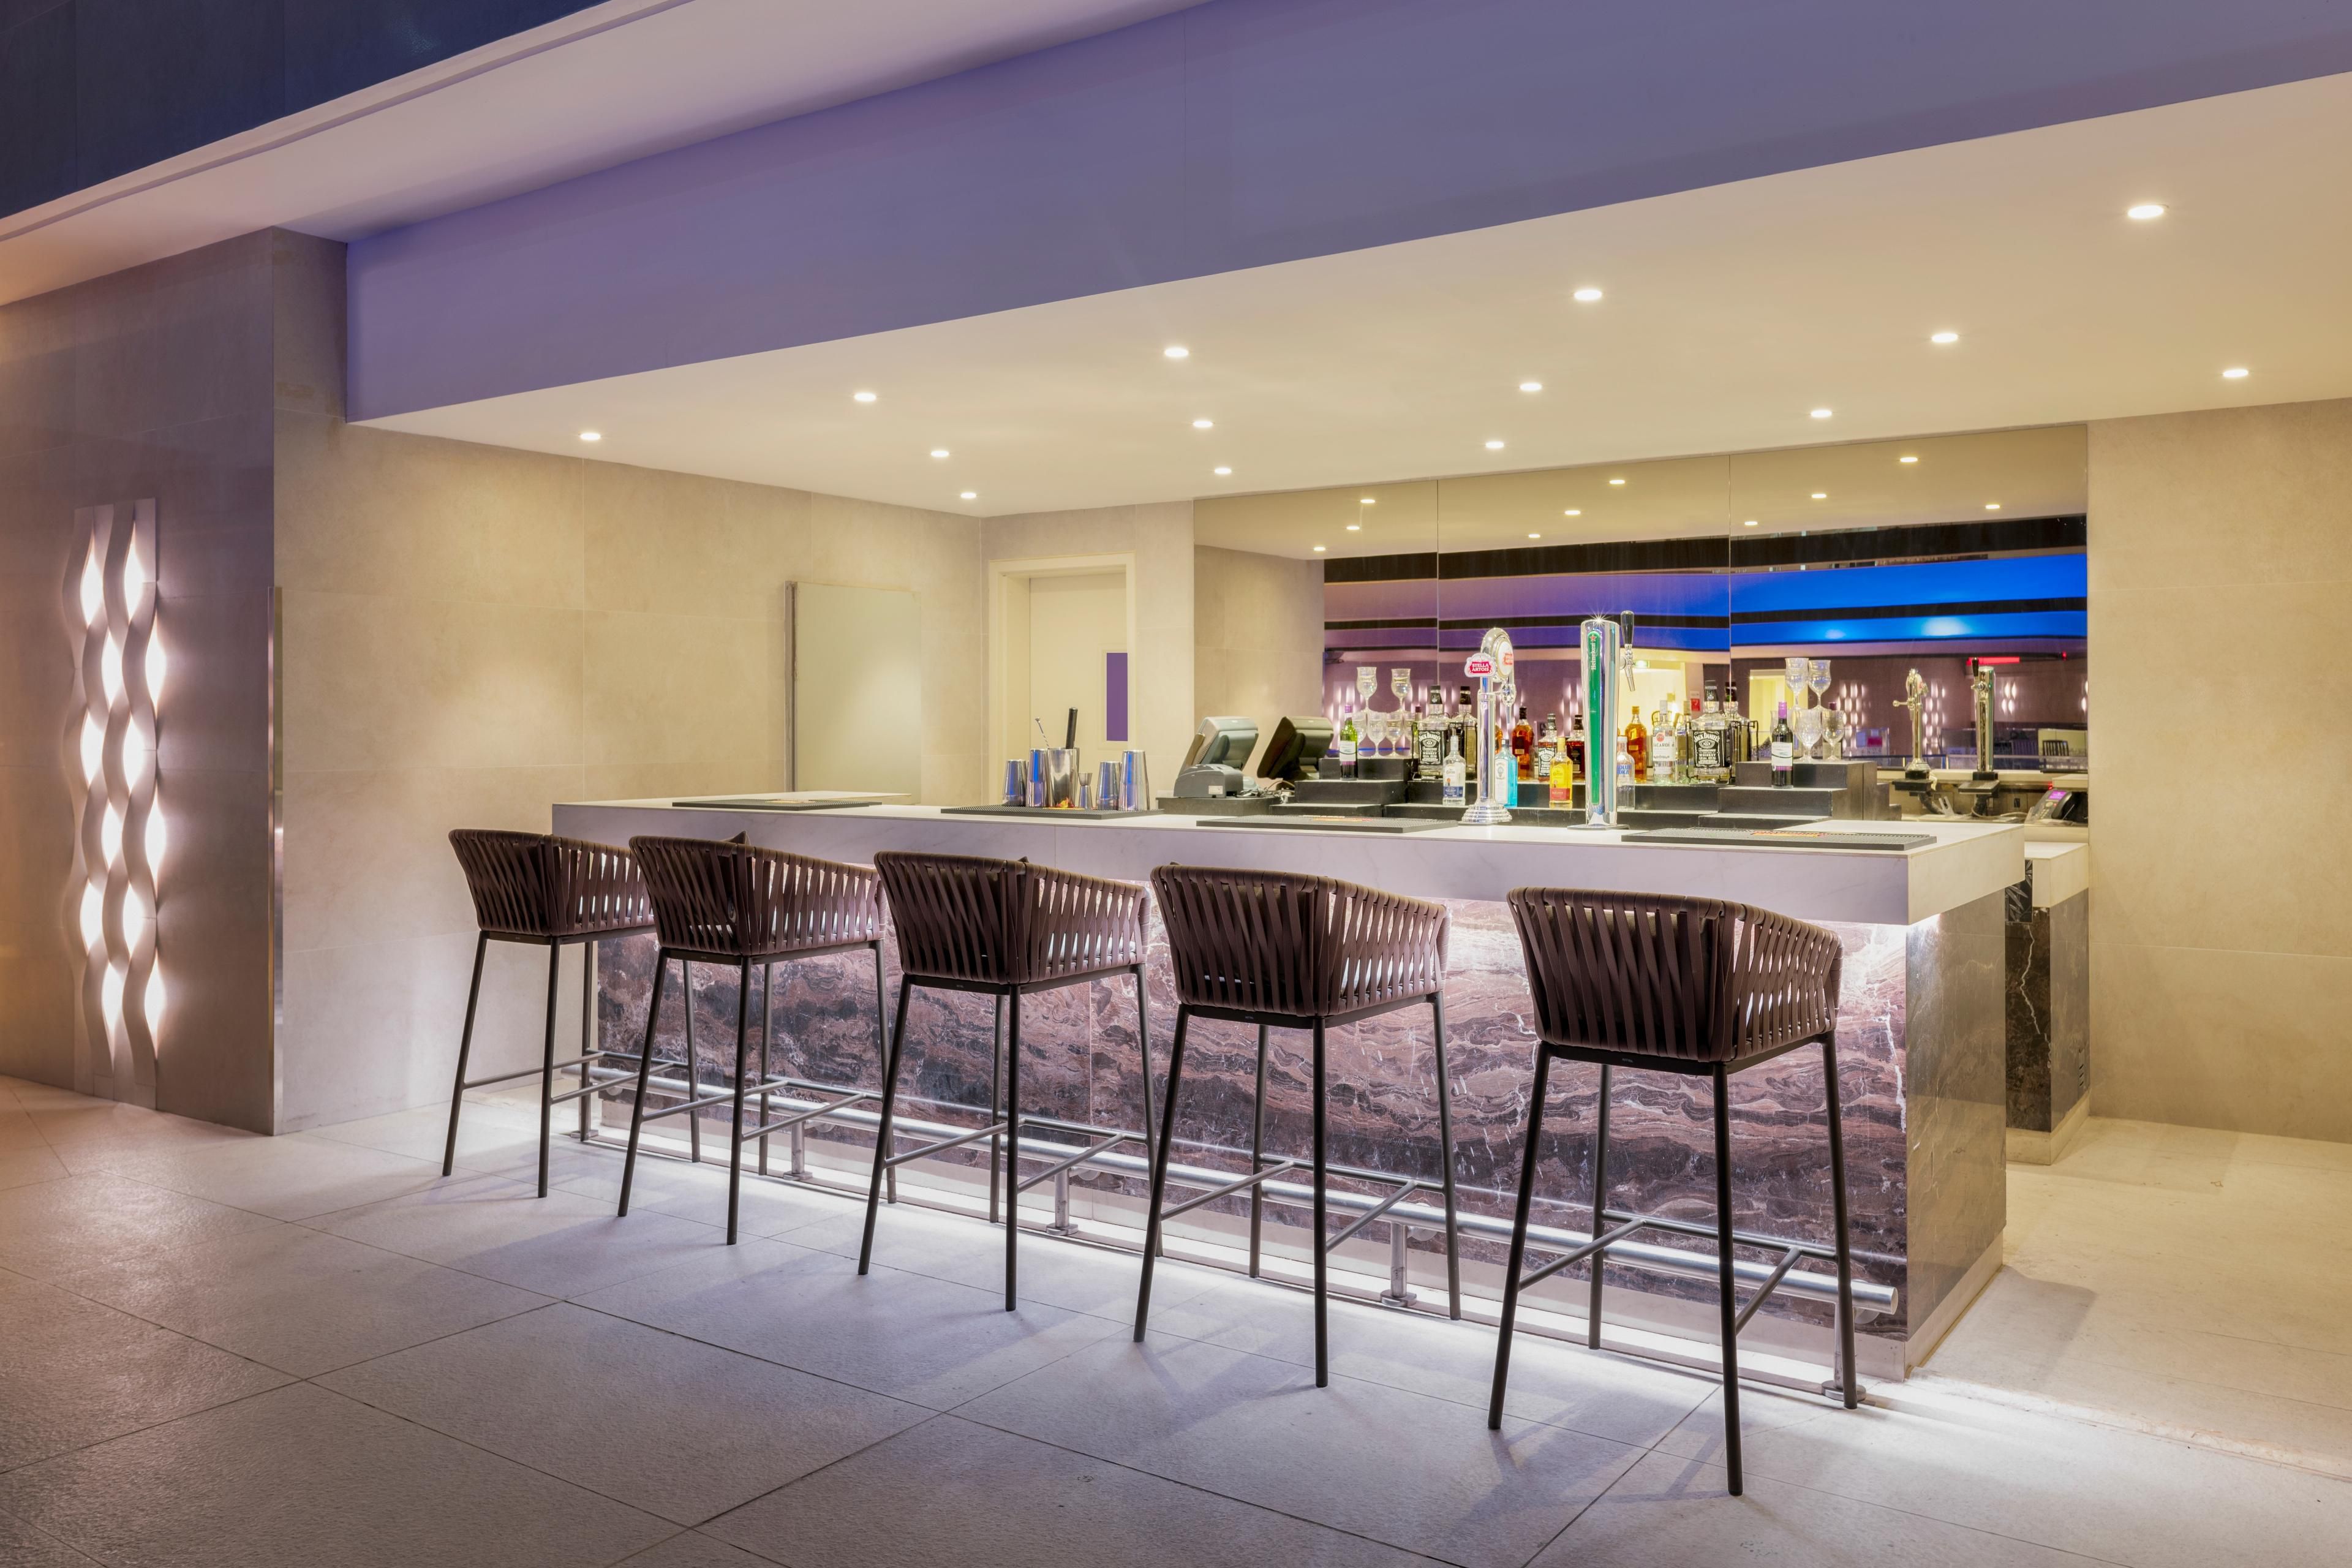 Liquidity poolside lounge has a bar and restaurant seating options